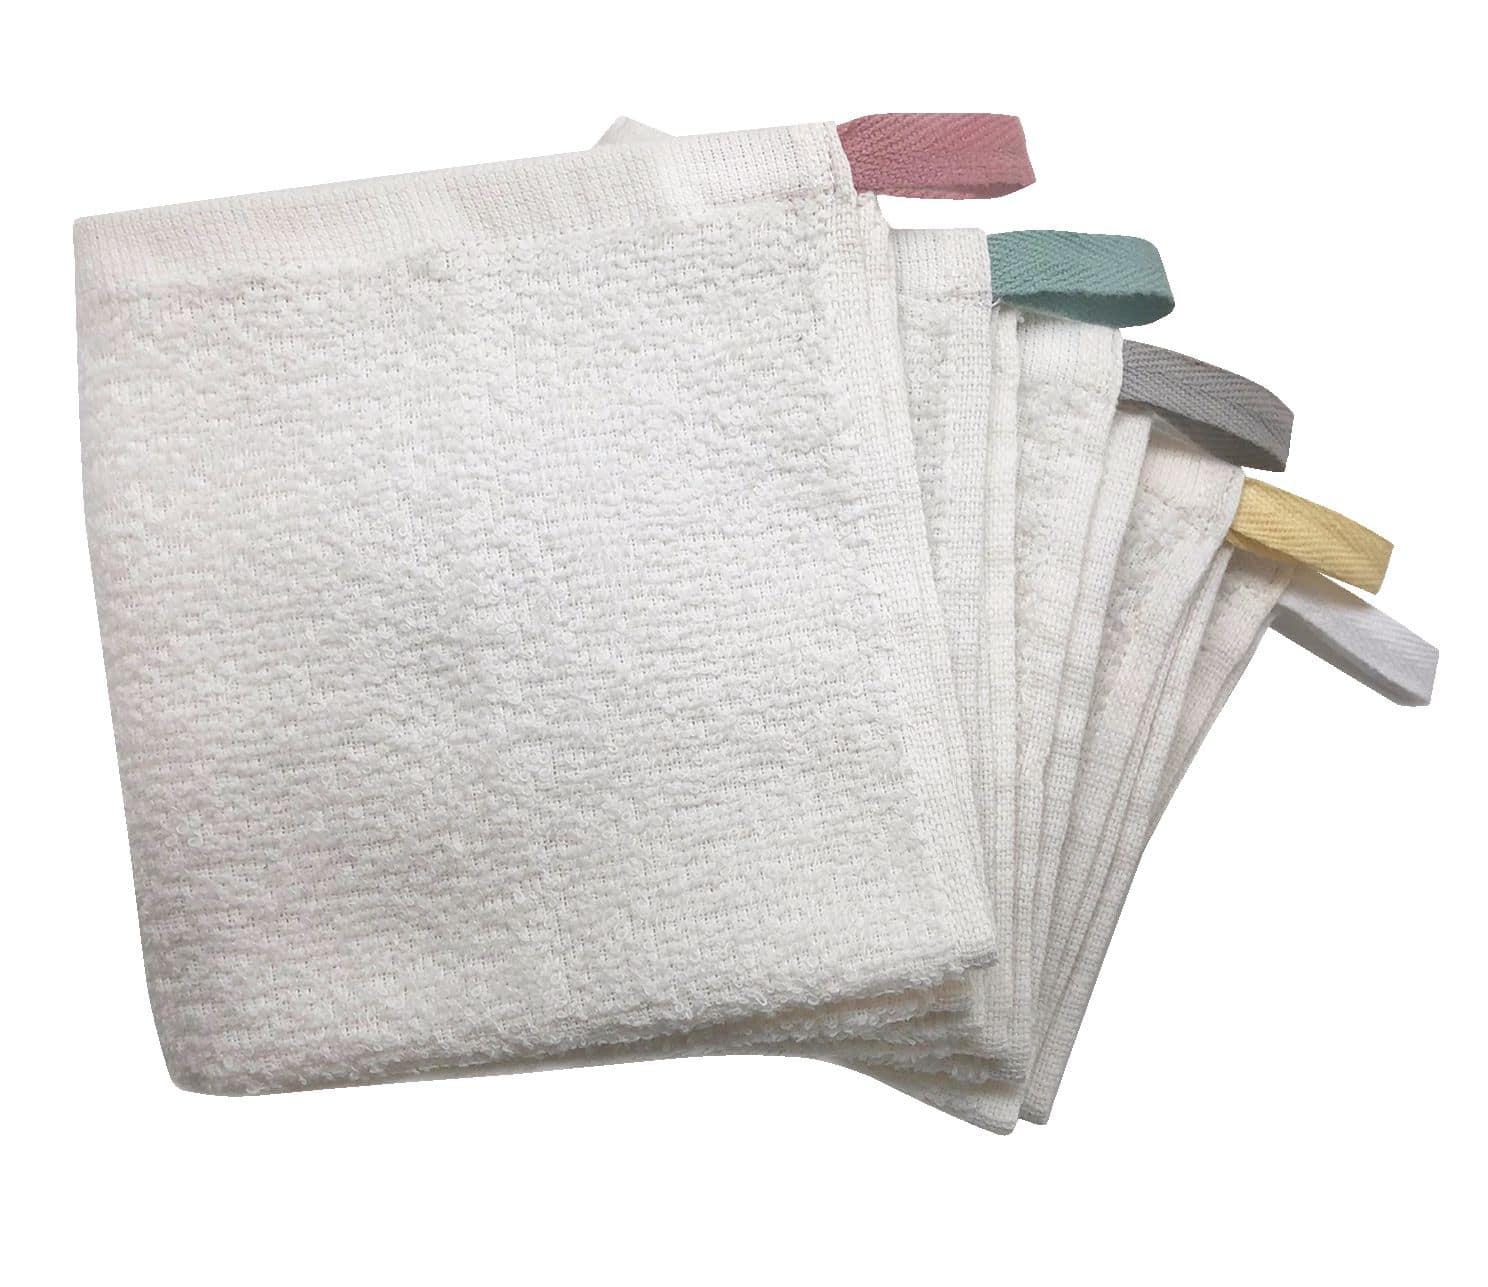 Towel with Hang Loop Hanging 3 Pcs Hand Towels Soft and Absorbent